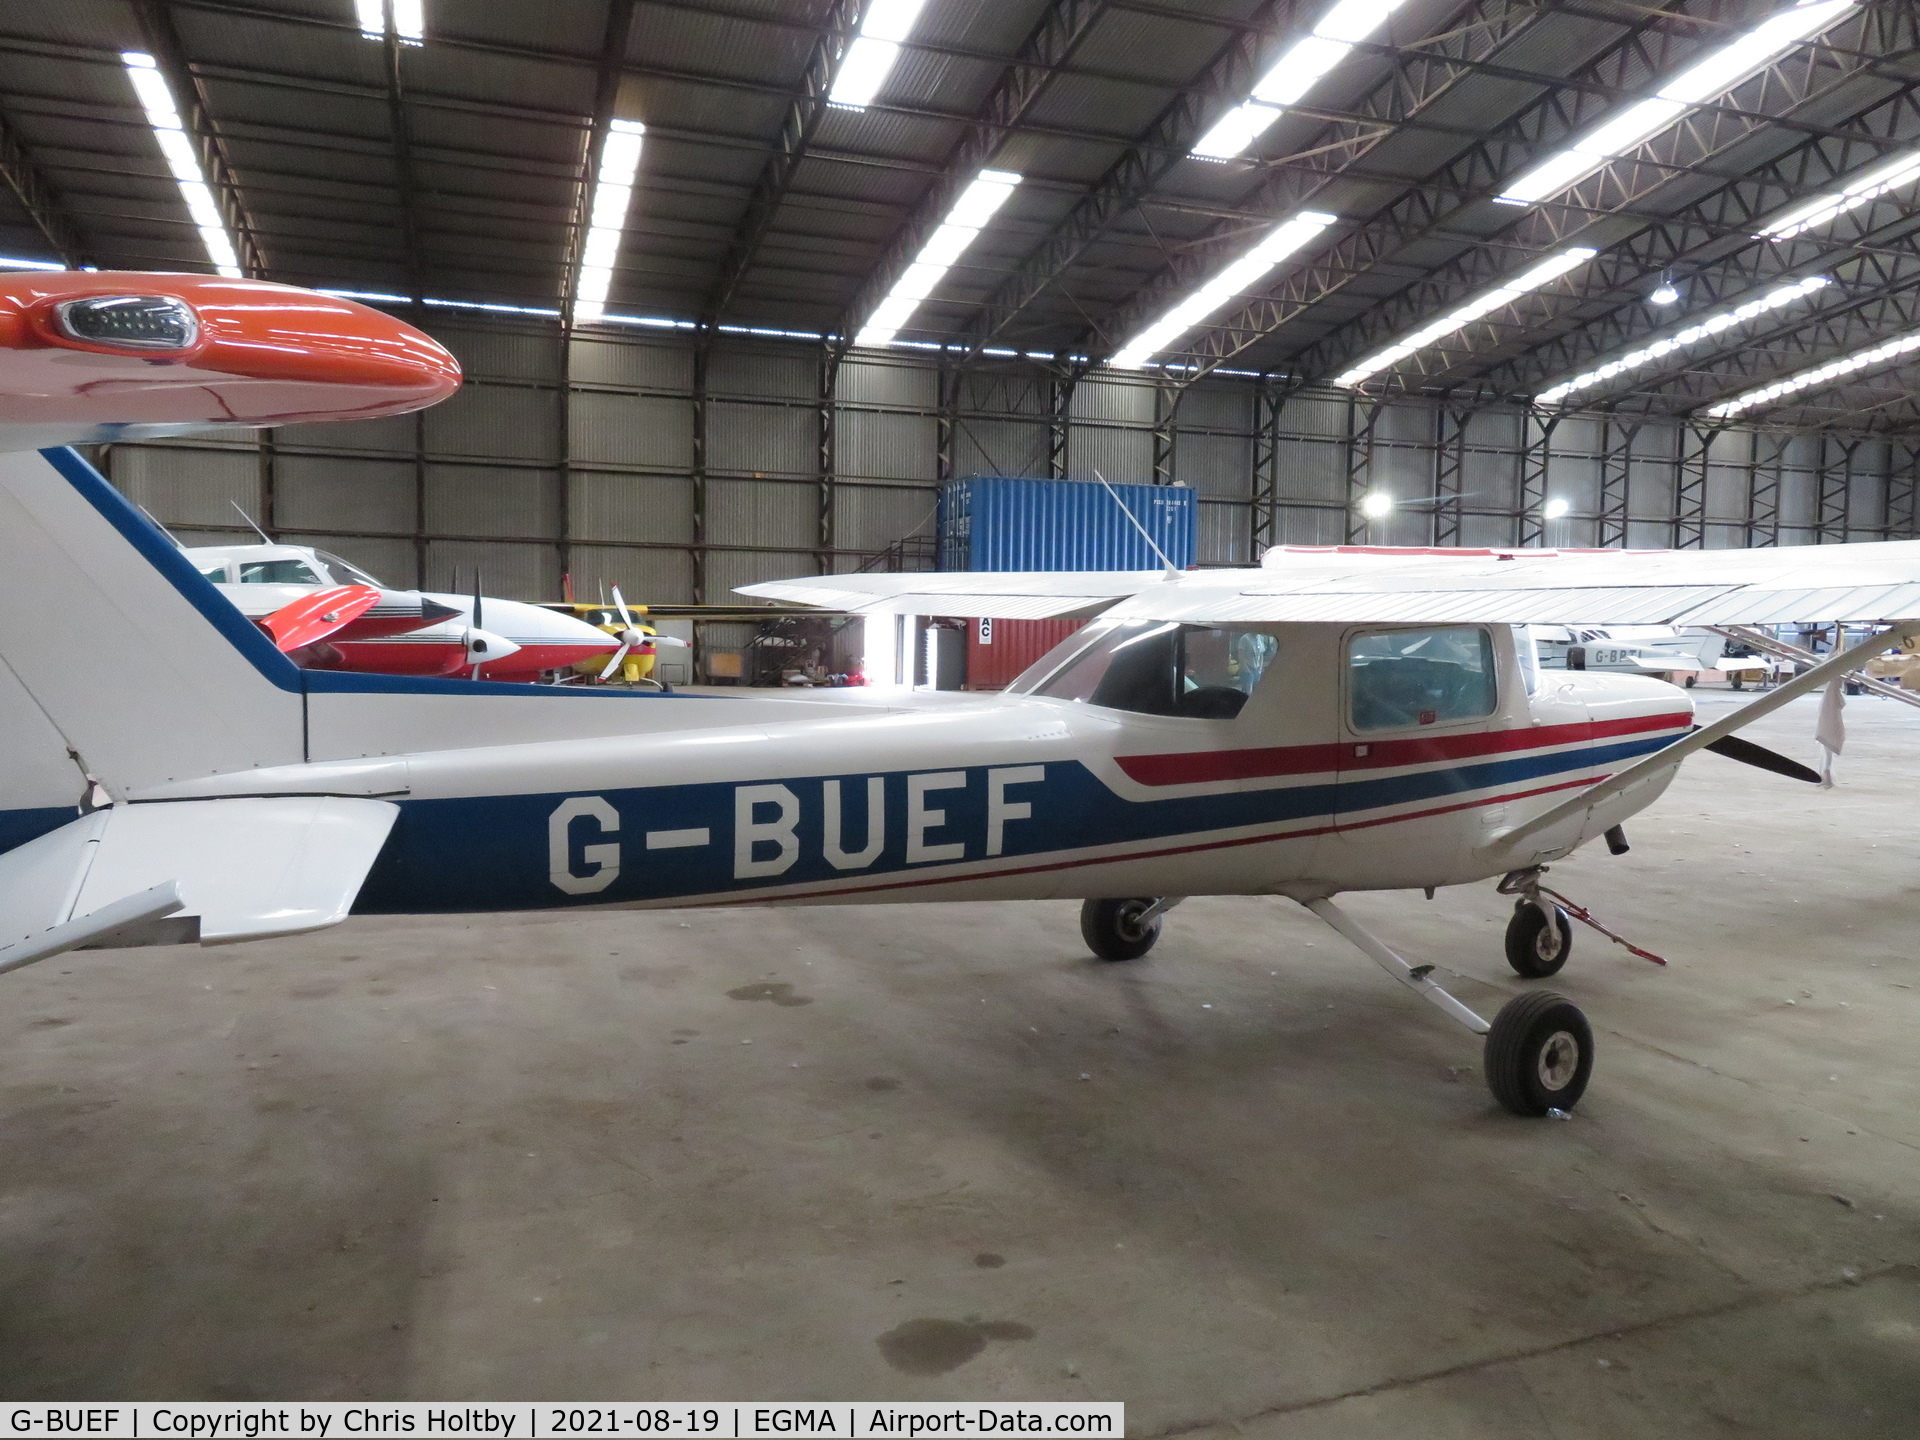 G-BUEF, 1977 Cessna 152 C/N 152-80862, In the hangar at Fowlmere, Cambs.